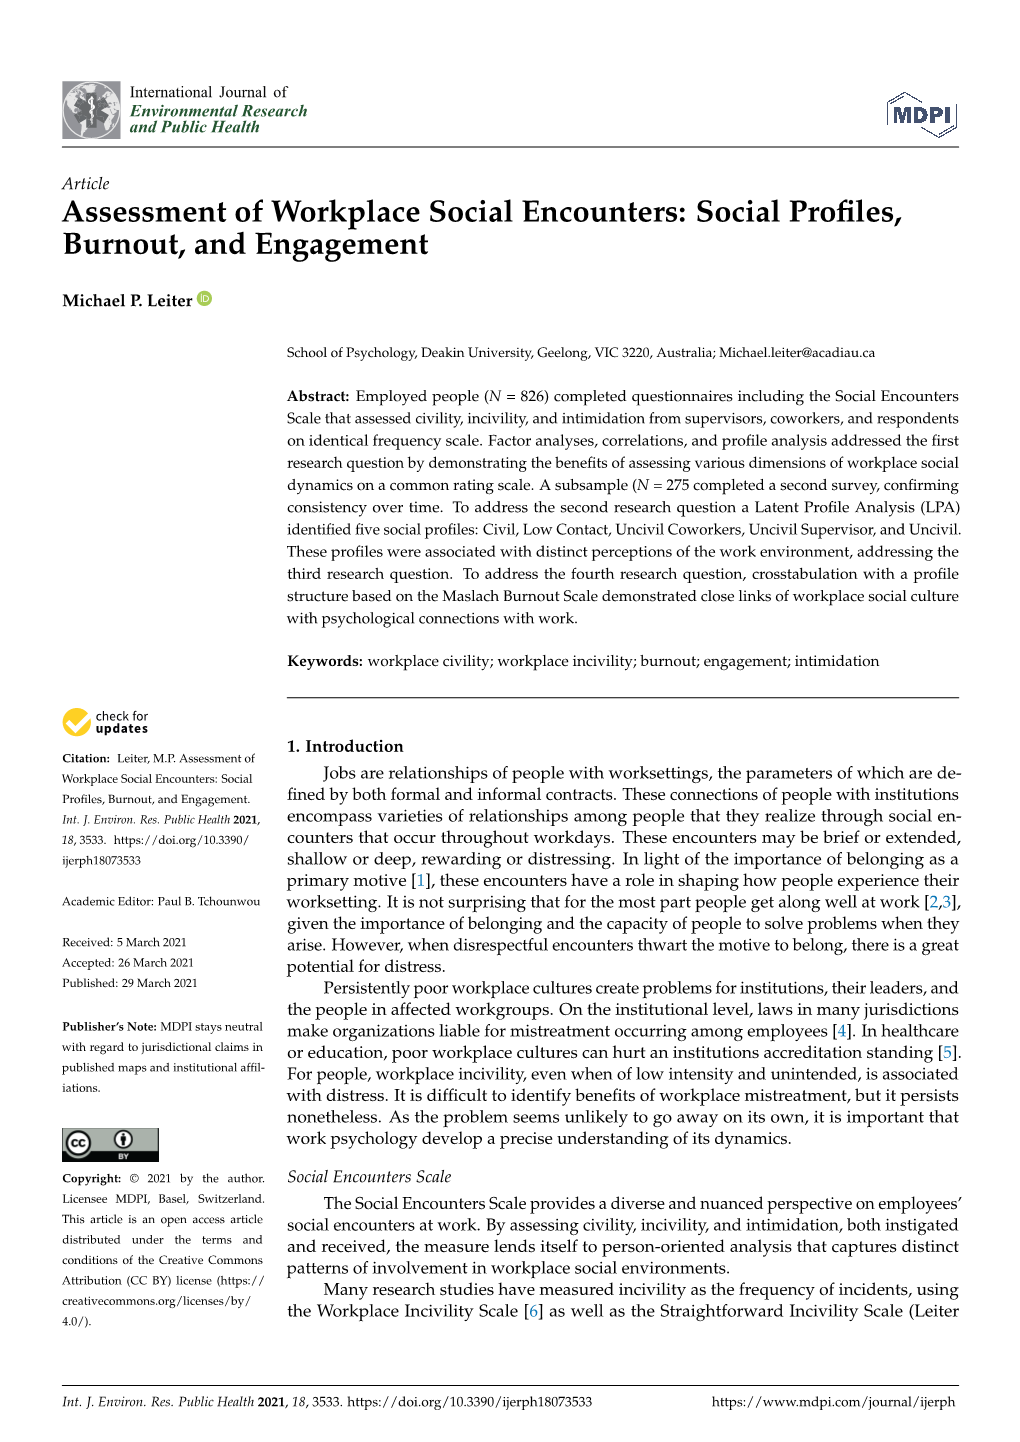 Assessment of Workplace Social Encounters: Social Proﬁles, Burnout, and Engagement